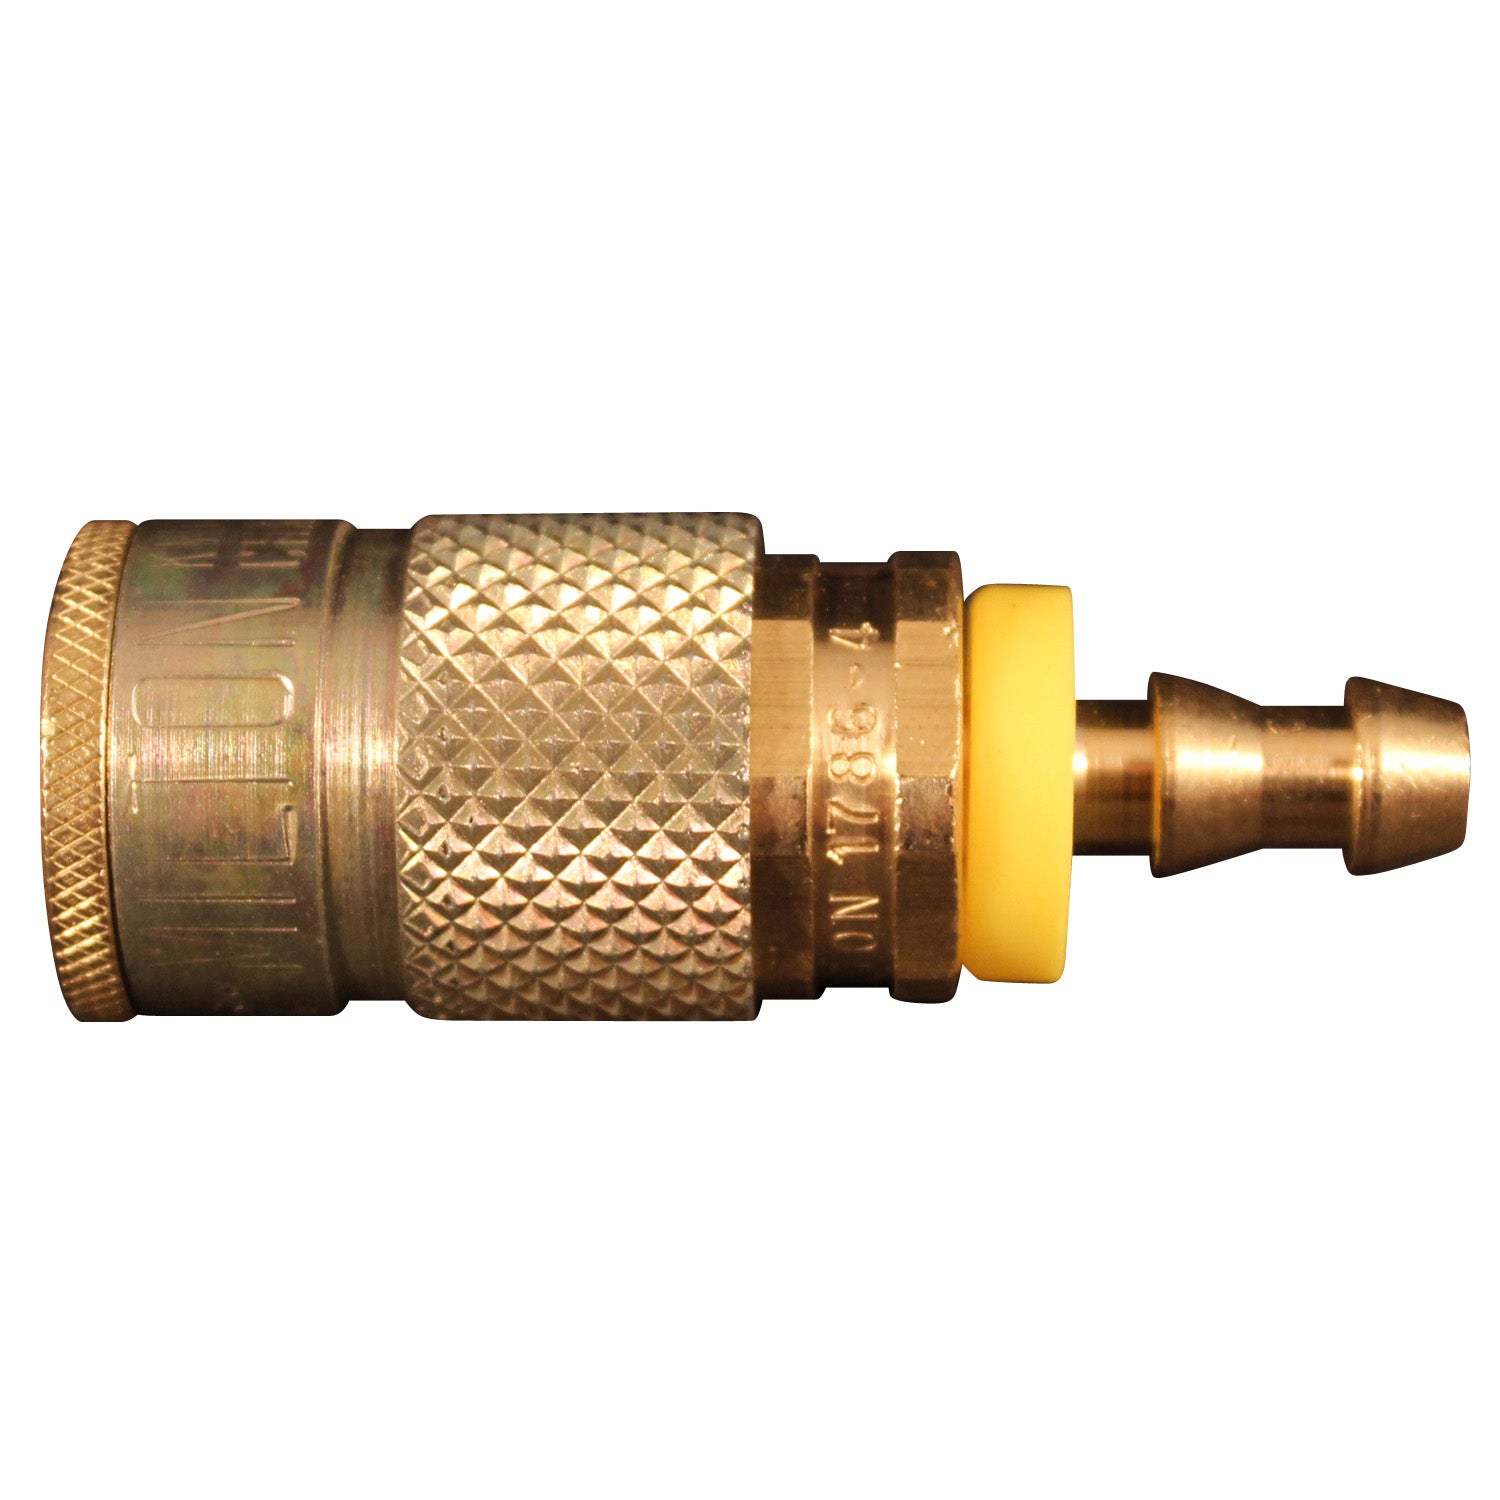 Hose Barb T-Style Push-on and Lock Coupler